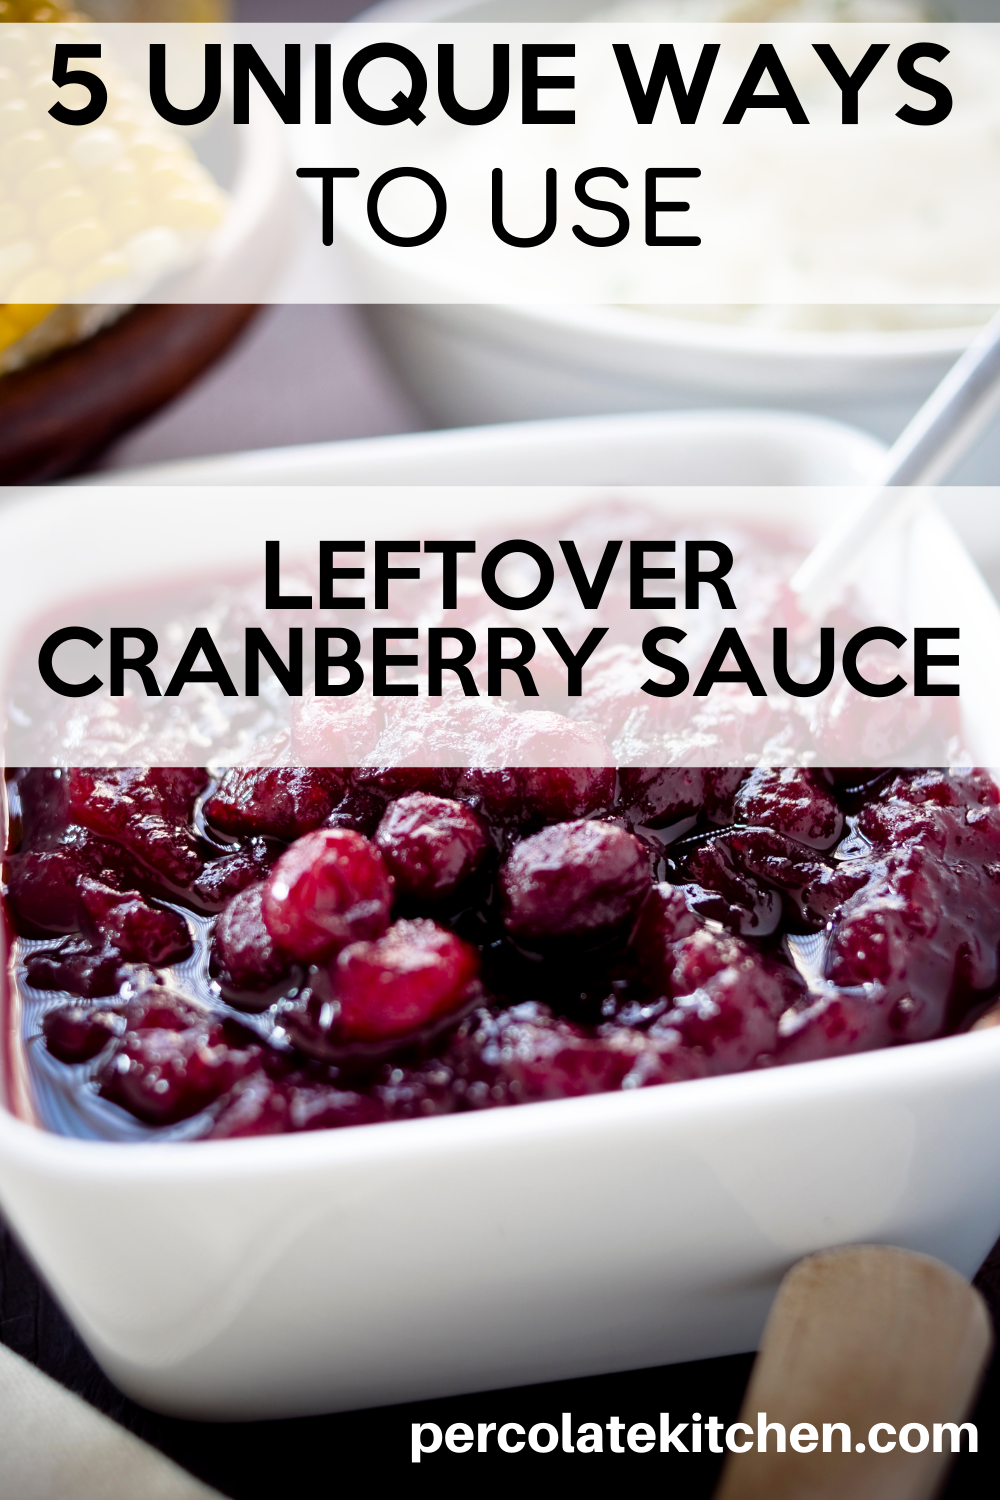 Don't throw out leftover cranberry sauce! Check this list for ideas from swirling it into yogurt, baking in muffins, add to side dishes & more.